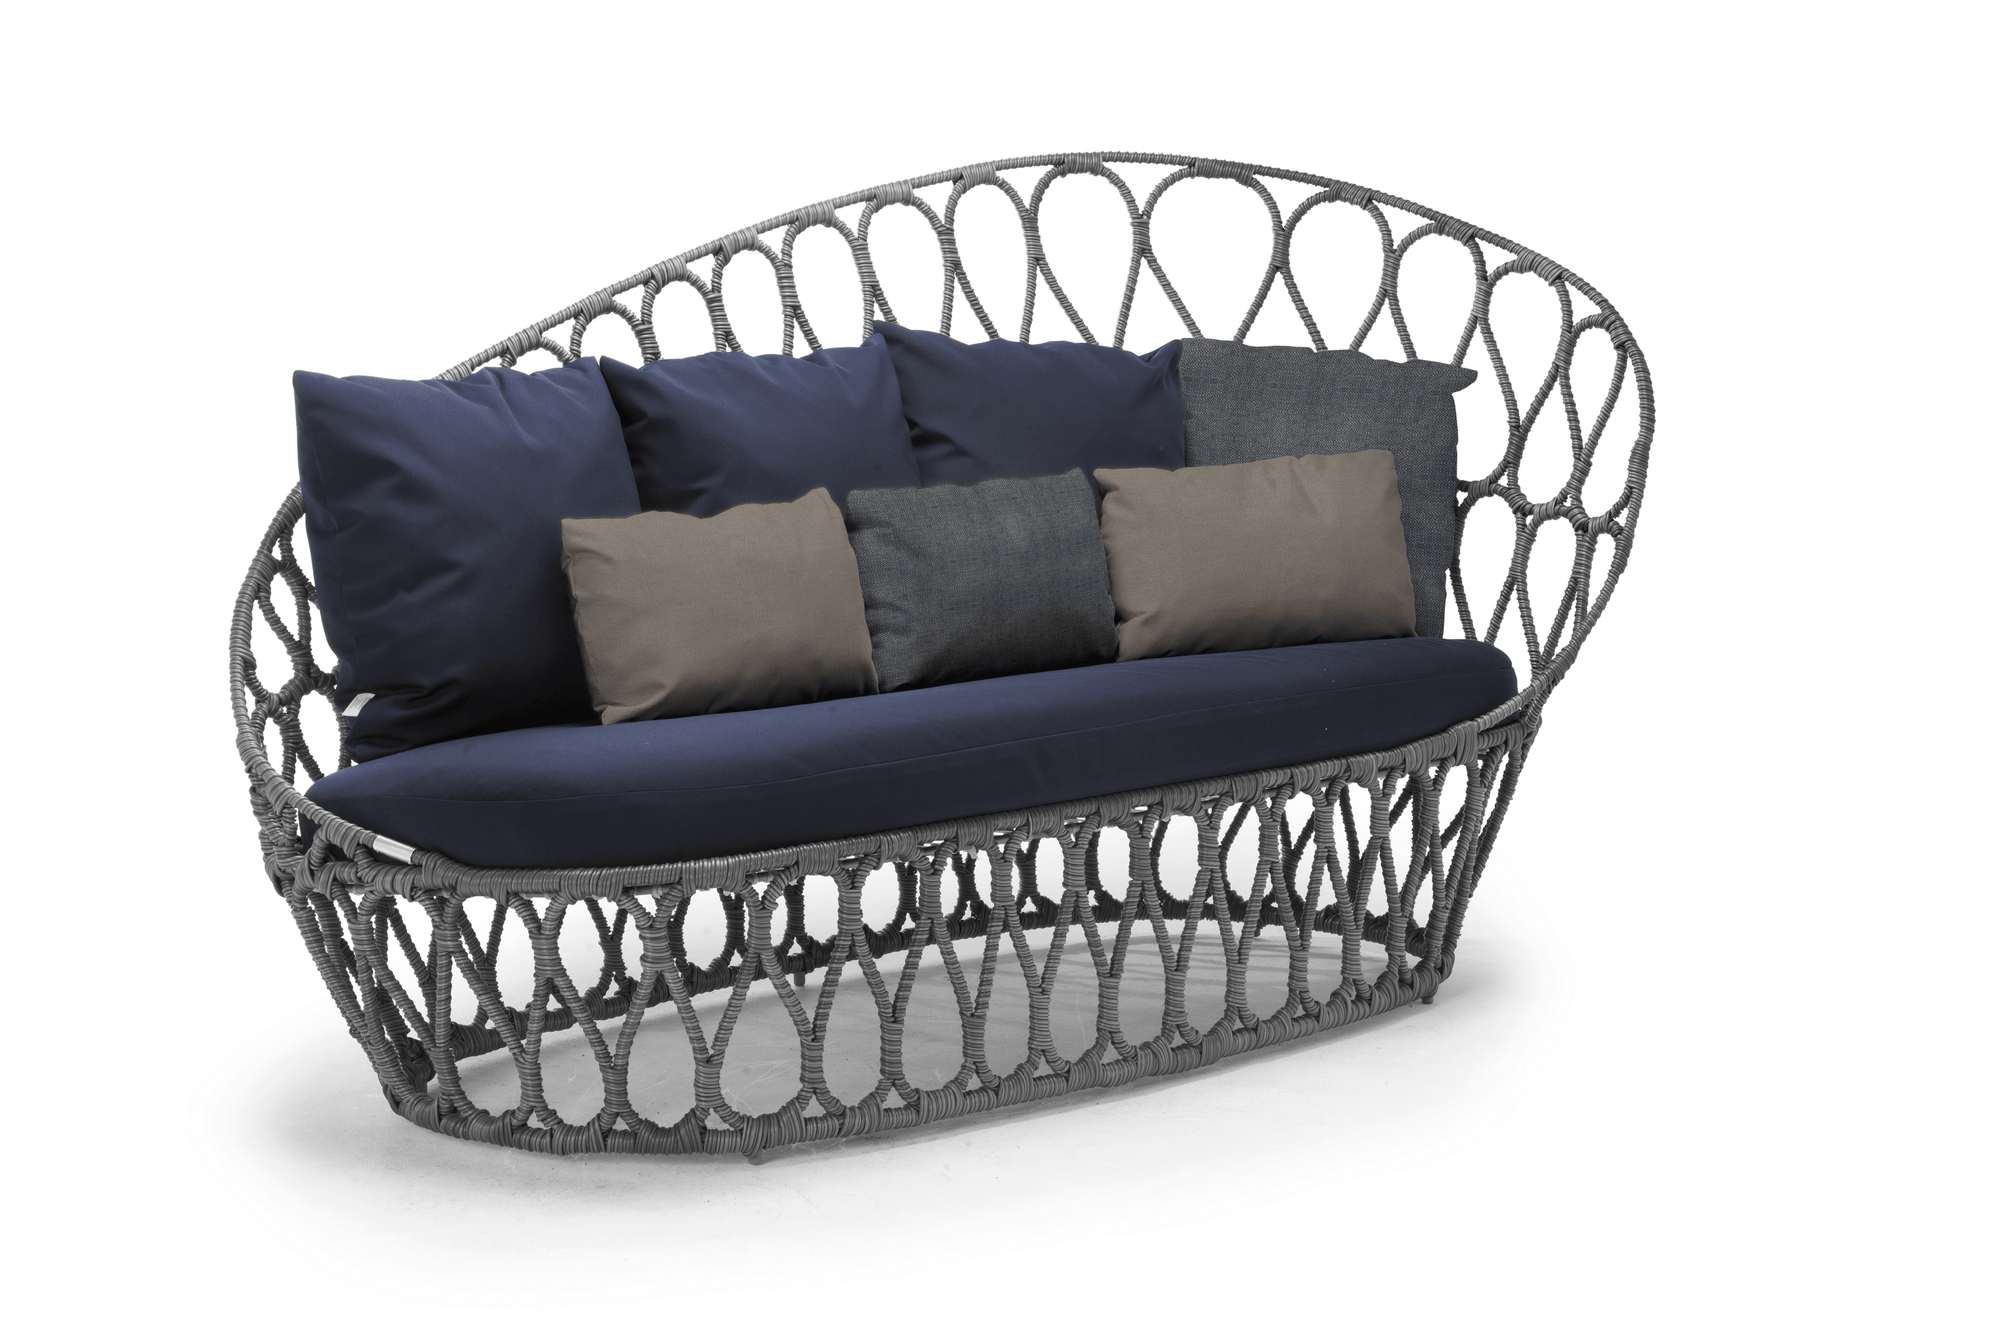 Forma  Daybed - Euro Living Furniture